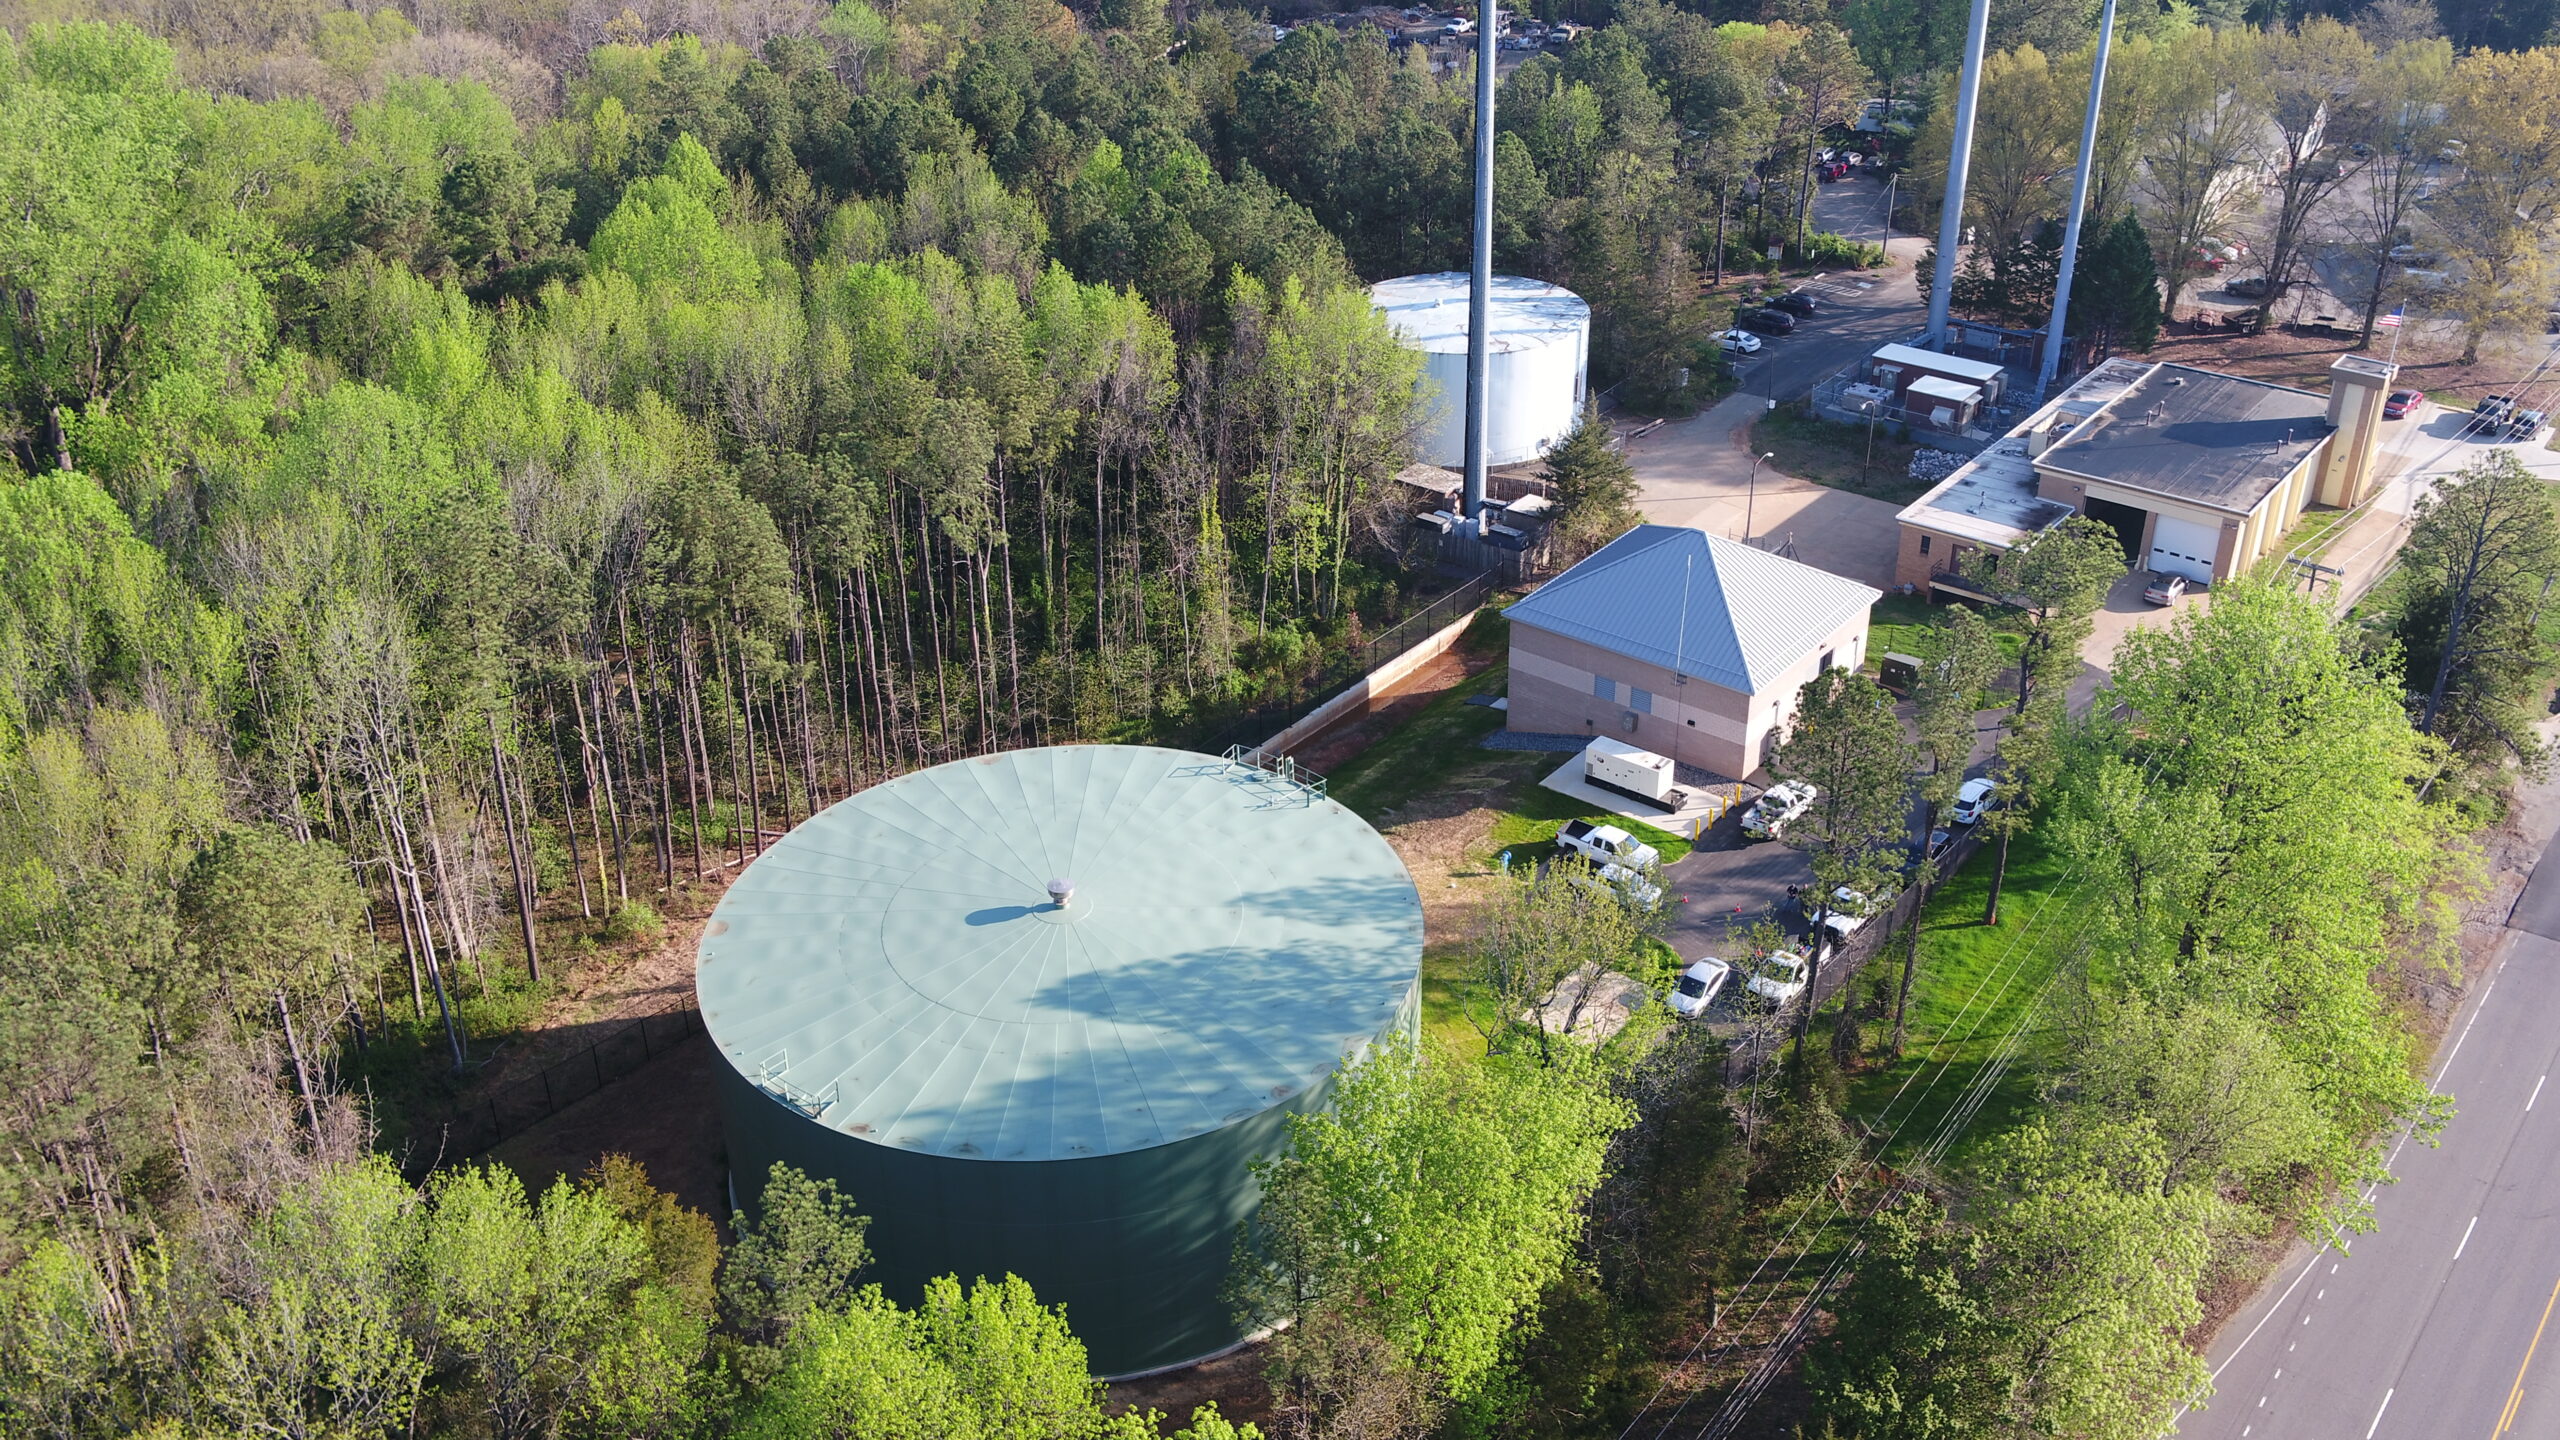 New Huguenot Road Pump Station fulfills Chesterfield County’s increased Water Demands